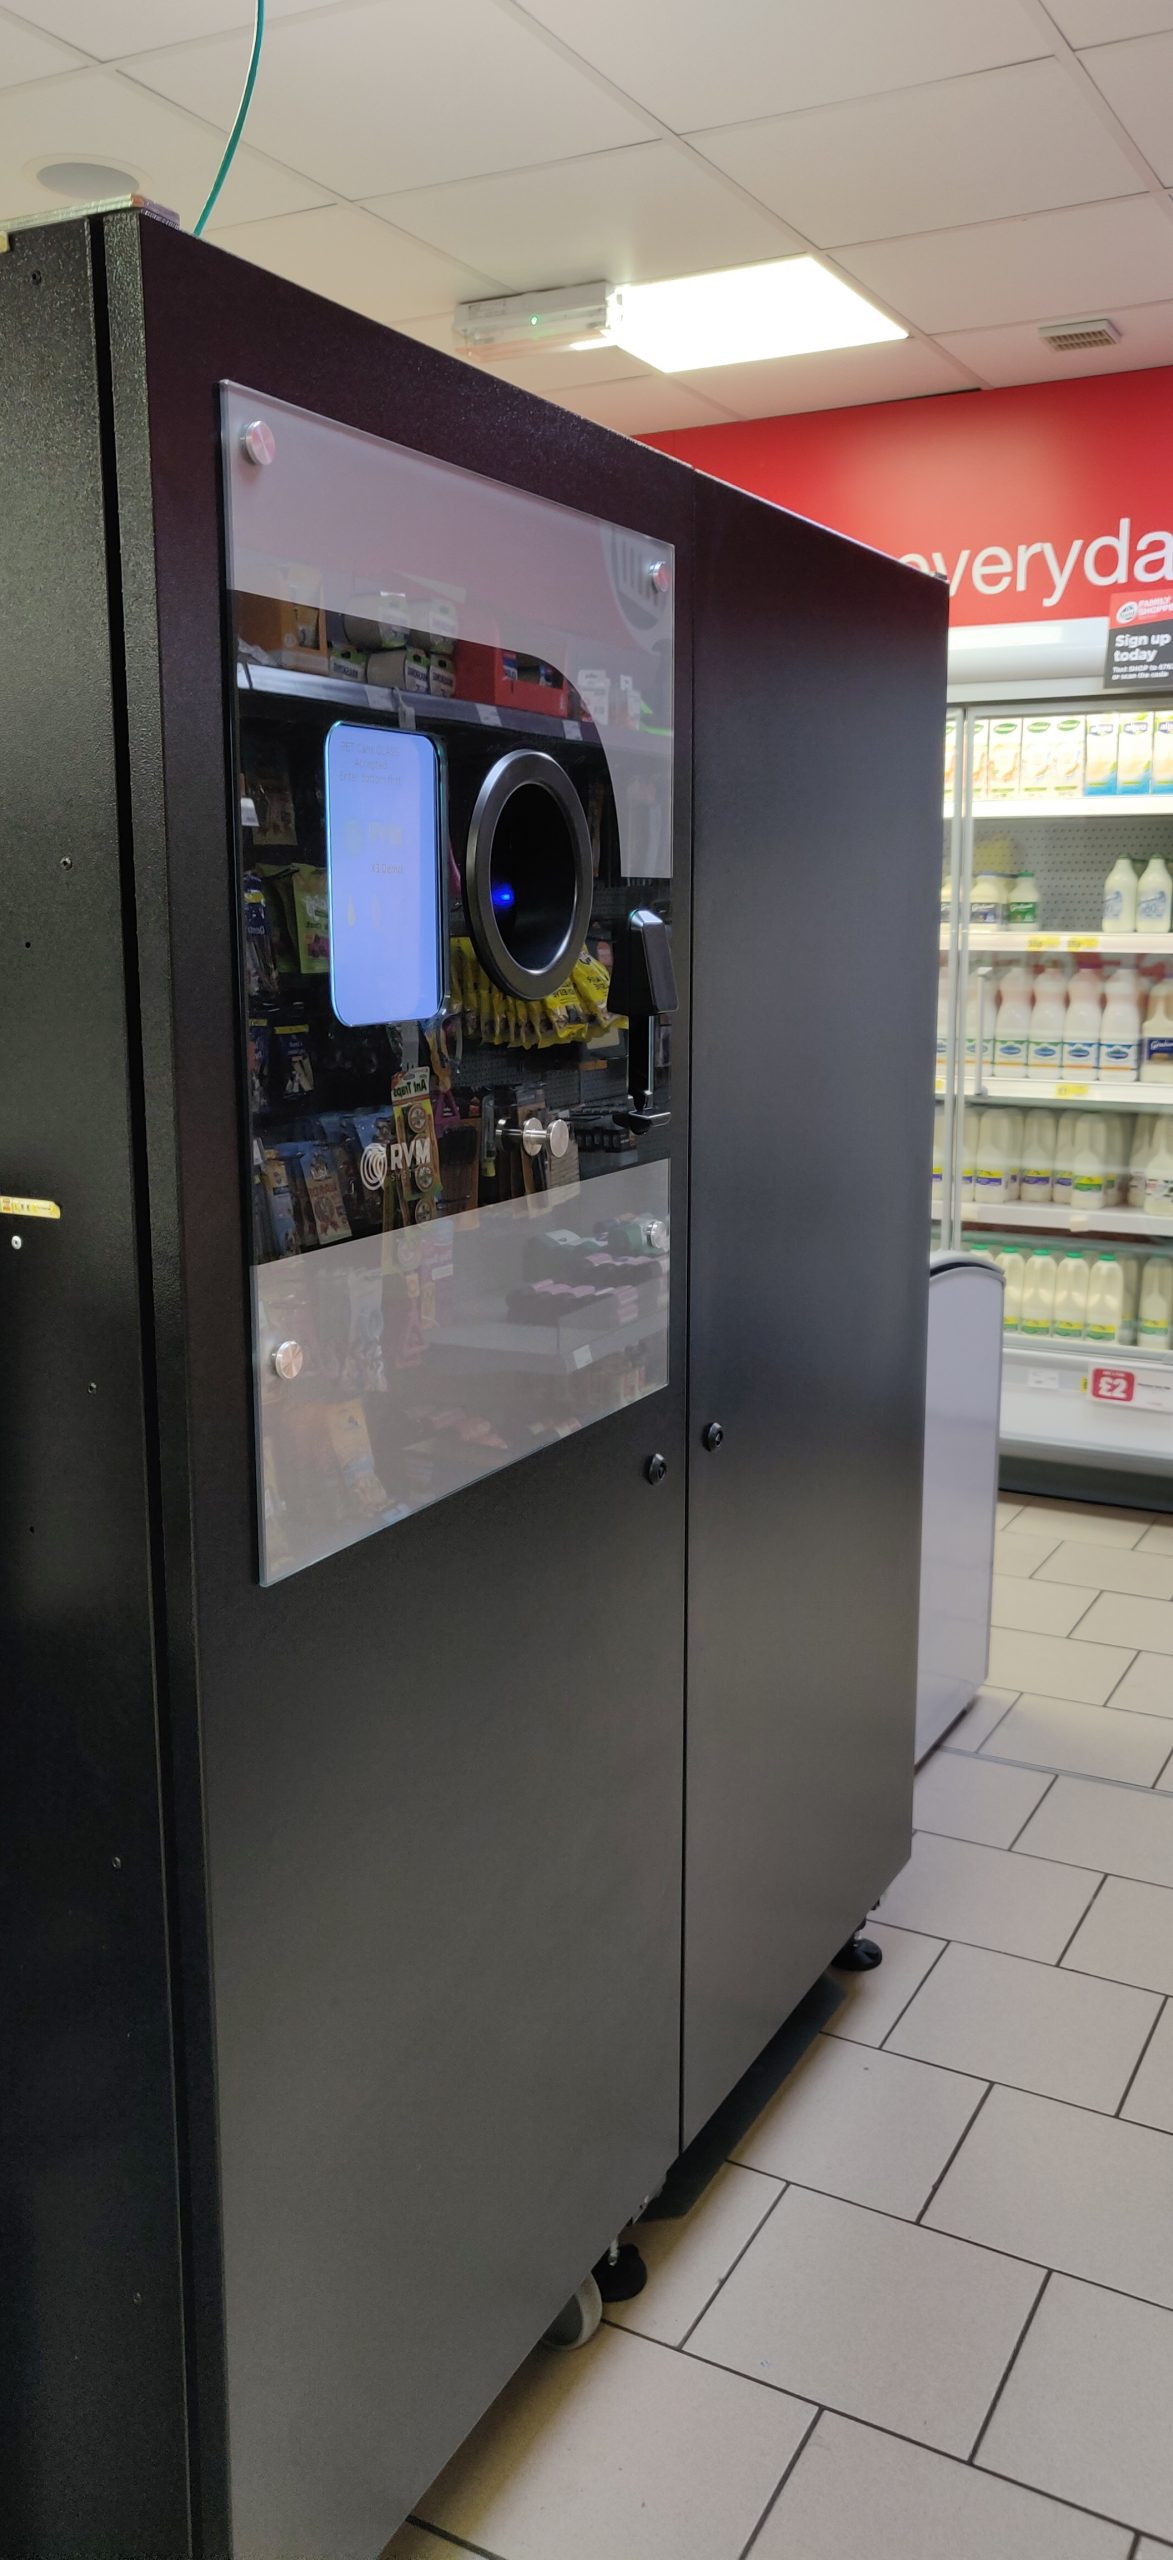 Family Shopper mo razzaq blantyre installed the First All in Reverse Vending Machine in the UK